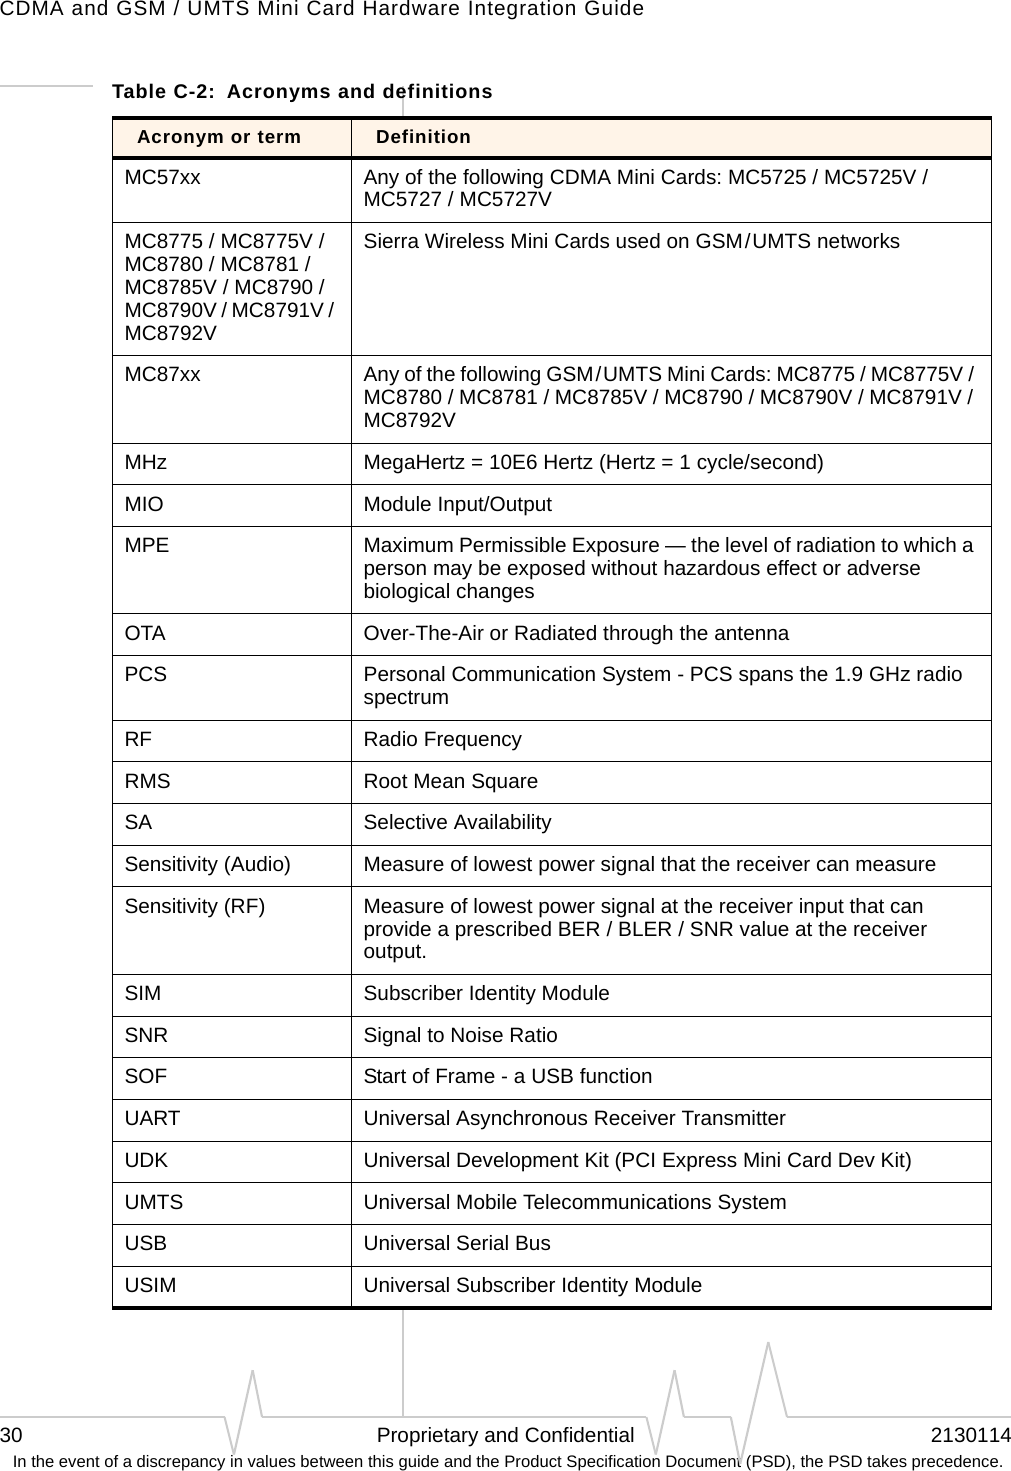 CDMA and GSM / UMTS Mini Card Hardware Integration Guide30 Proprietary and Confidential 2130114 In the event of a discrepancy in values between this guide and the Product Specification Document (PSD), the PSD takes precedence.MC57xx Any of the following CDMA Mini Cards: MC5725 / MC5725V / MC5727 / MC5727VMC8775 / MC8775V / MC8780 / MC8781 / MC8785V / MC8790 / MC8790V / MC8791V / MC8792VSierra Wireless Mini Cards used on GSM / UMTS networksMC87xx Any of the following GSM / UMTS Mini Cards: MC8775 / MC8775V / MC8780 / MC8781 / MC8785V / MC8790 / MC8790V / MC8791V / MC8792VMHz MegaHertz = 10E6 Hertz (Hertz = 1 cycle/second)MIO Module Input/OutputMPE Maximum Permissible Exposure — the level of radiation to which a person may be exposed without hazardous effect or adverse biological changesOTA Over-The-Air or Radiated through the antennaPCS Personal Communication System - PCS spans the 1.9 GHz radio spectrumRF Radio FrequencyRMS Root Mean SquareSA Selective AvailabilitySensitivity (Audio) Measure of lowest power signal that the receiver can measureSensitivity (RF) Measure of lowest power signal at the receiver input that can provide a prescribed BER / BLER / SNR value at the receiver output.SIM Subscriber Identity ModuleSNR Signal to Noise RatioSOF Start of Frame - a USB functionUART Universal Asynchronous Receiver TransmitterUDK Universal Development Kit (PCI Express Mini Card Dev Kit)UMTS Universal Mobile Telecommunications SystemUSB Universal Serial BusUSIM Universal Subscriber Identity ModuleTable C-2:  Acronyms and definitionsAcronym or term Definition